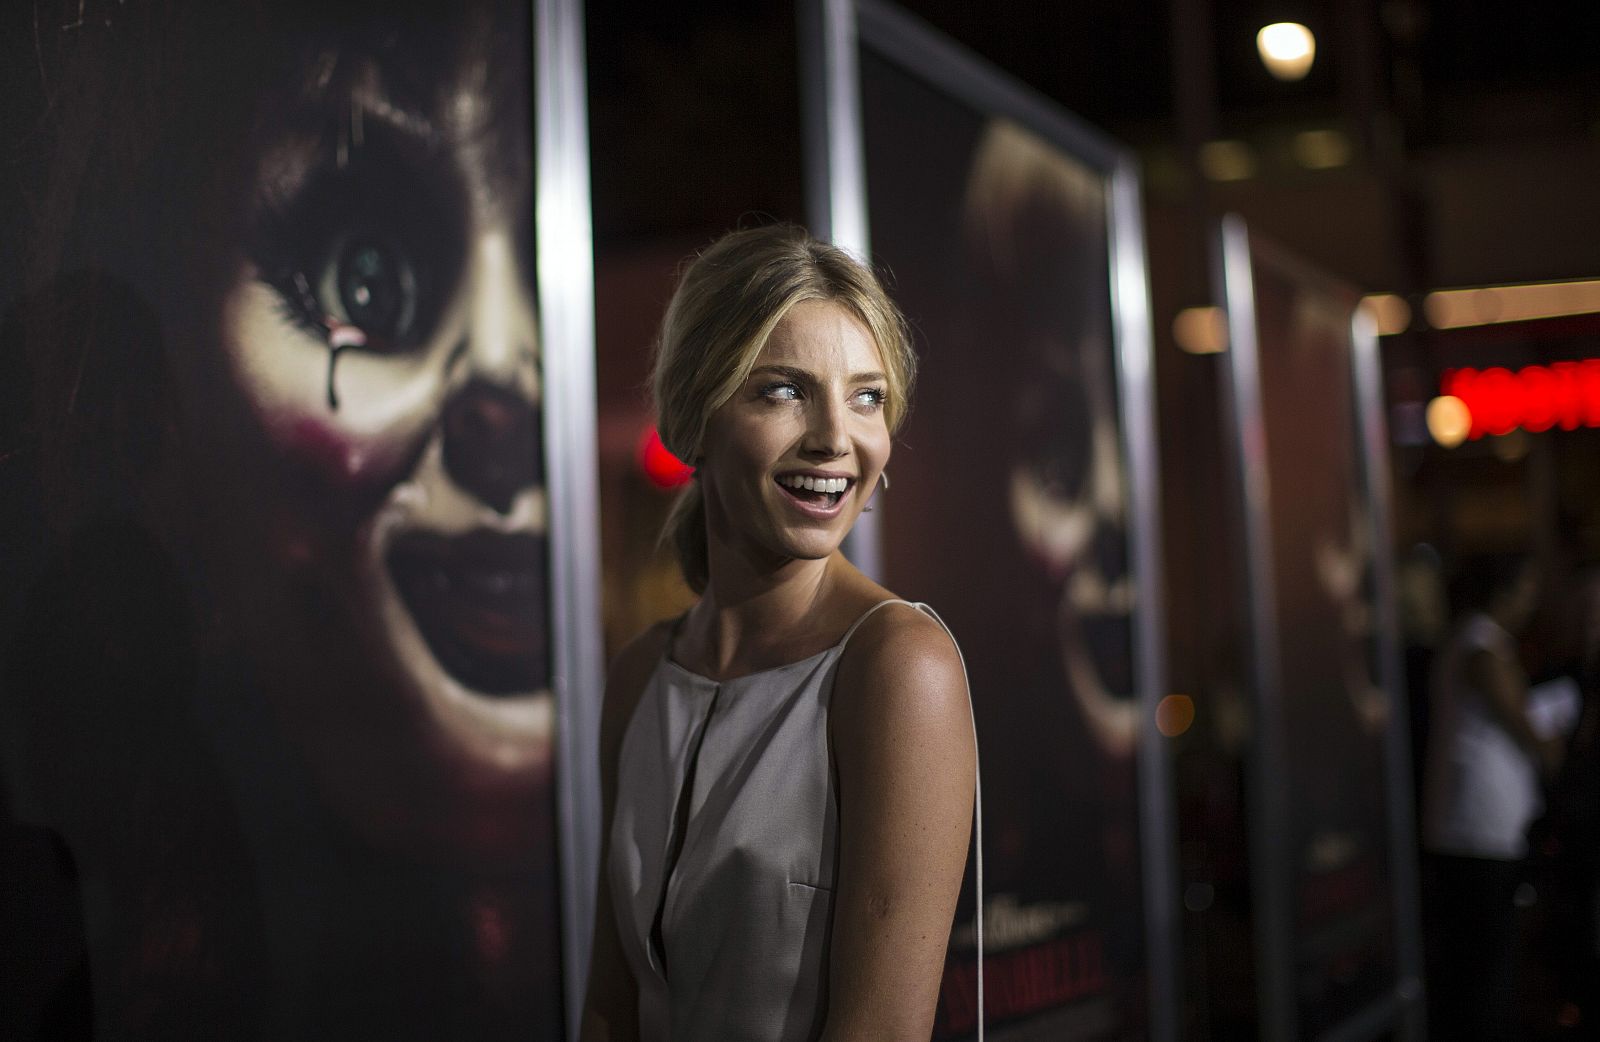 Cast member Wallis poses at the premiere of "Annabelle" at the TCL Chinese theatre in Hollywood